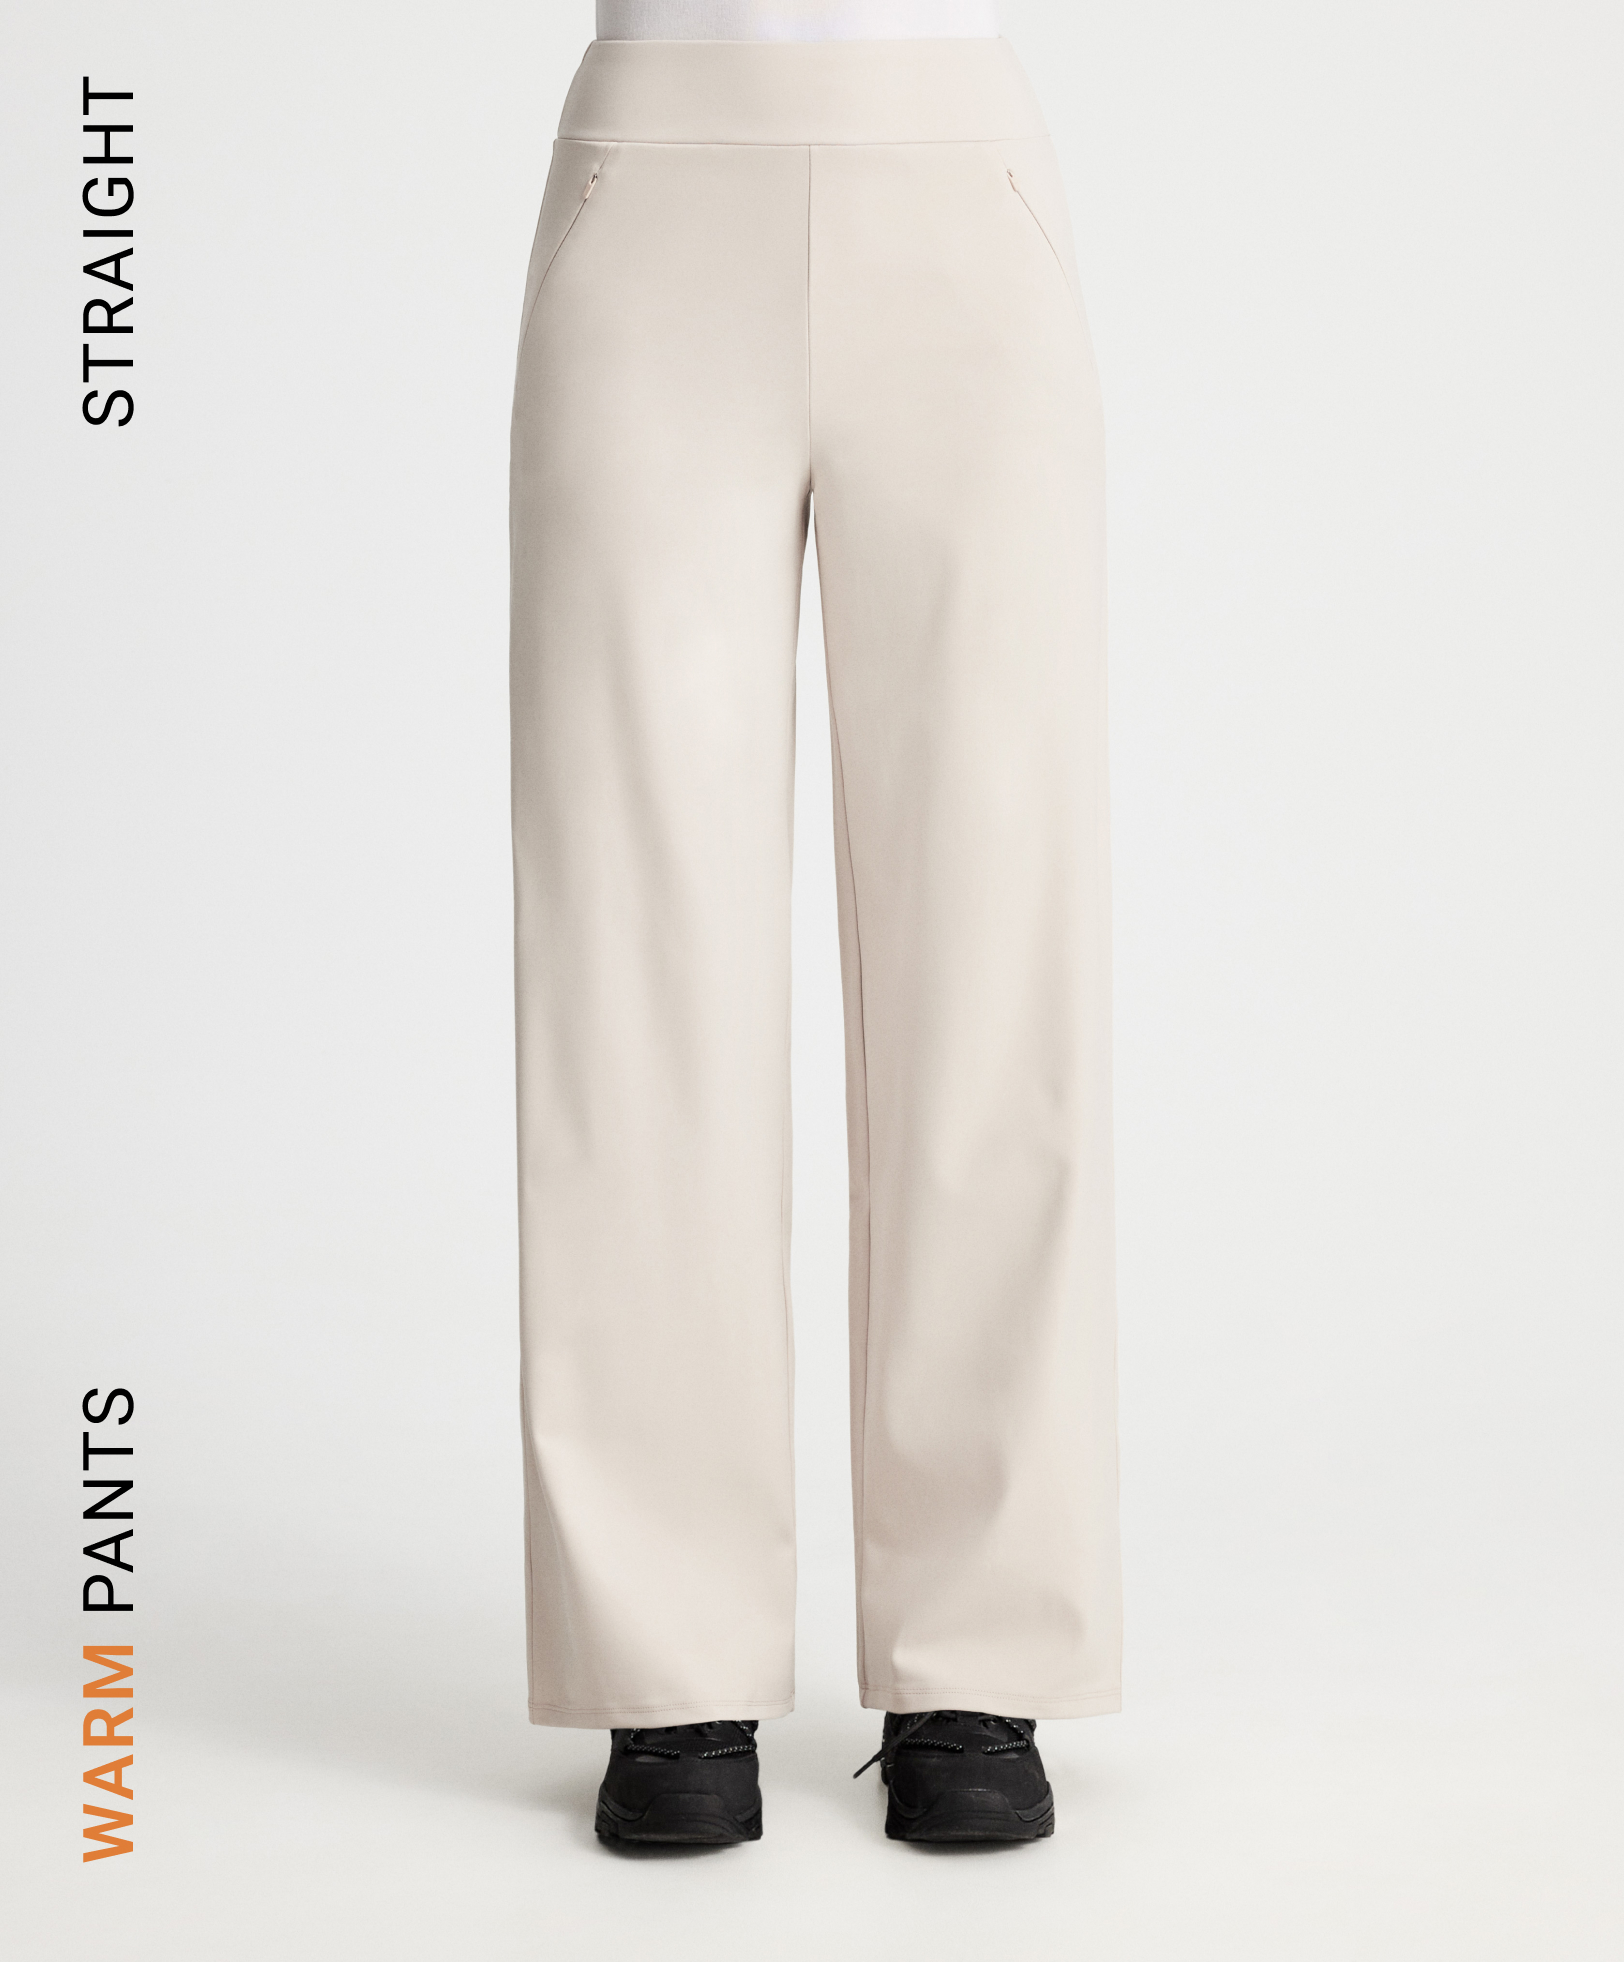 Warm straight trousers